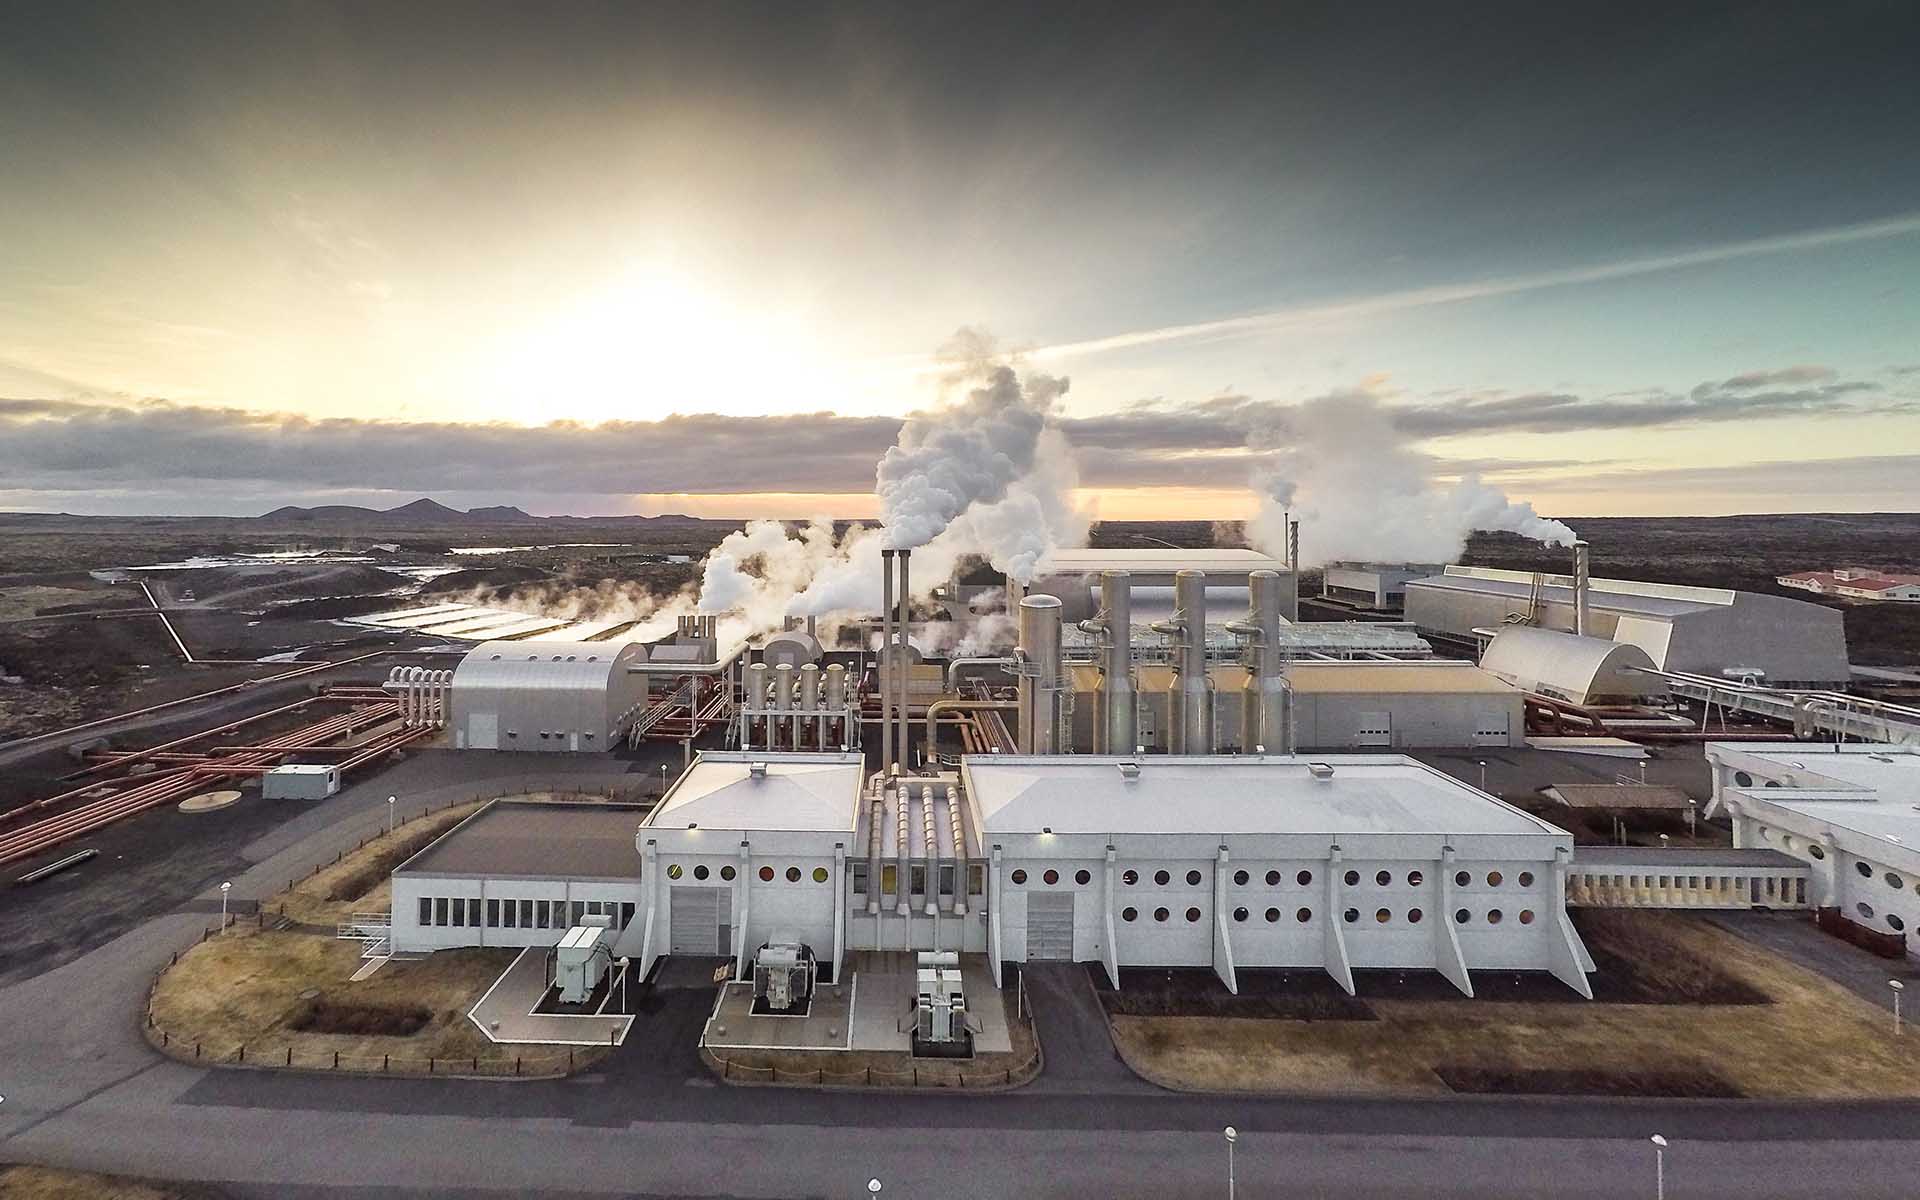 MoonLite Confirms Power & Distribution for Massive Mining Operation in Iceland